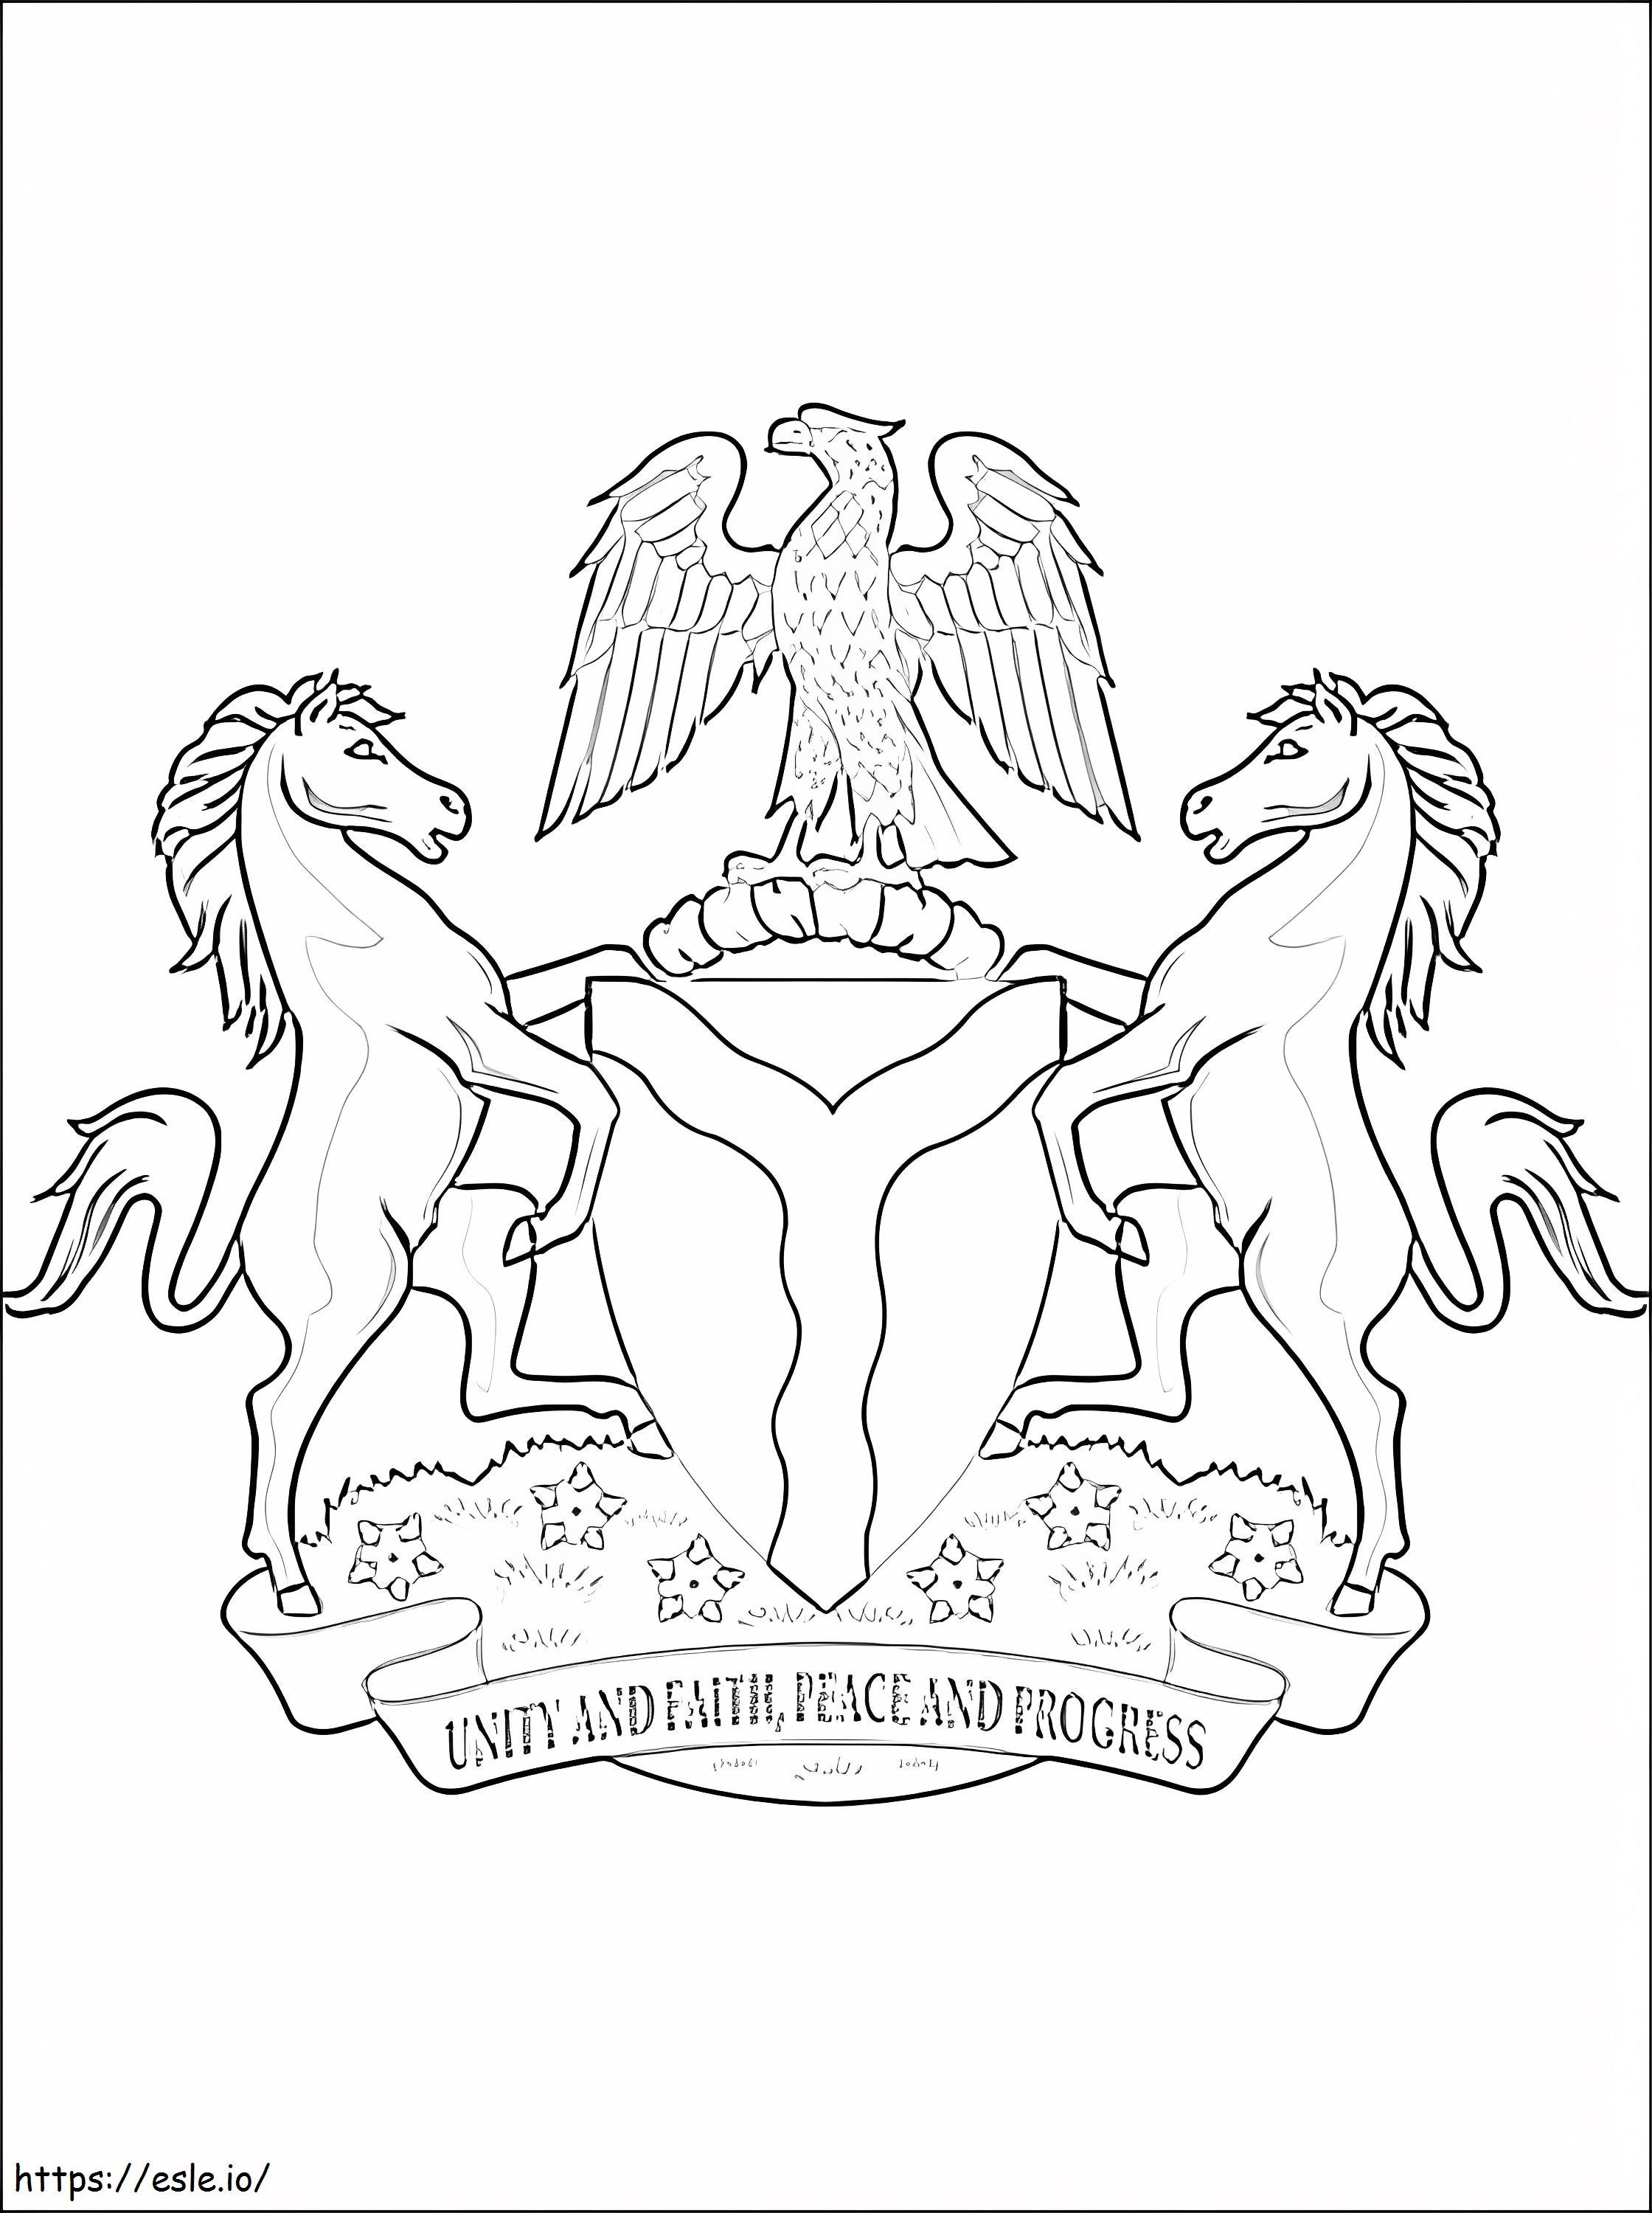 Nigeria Coat Of Arms coloring page